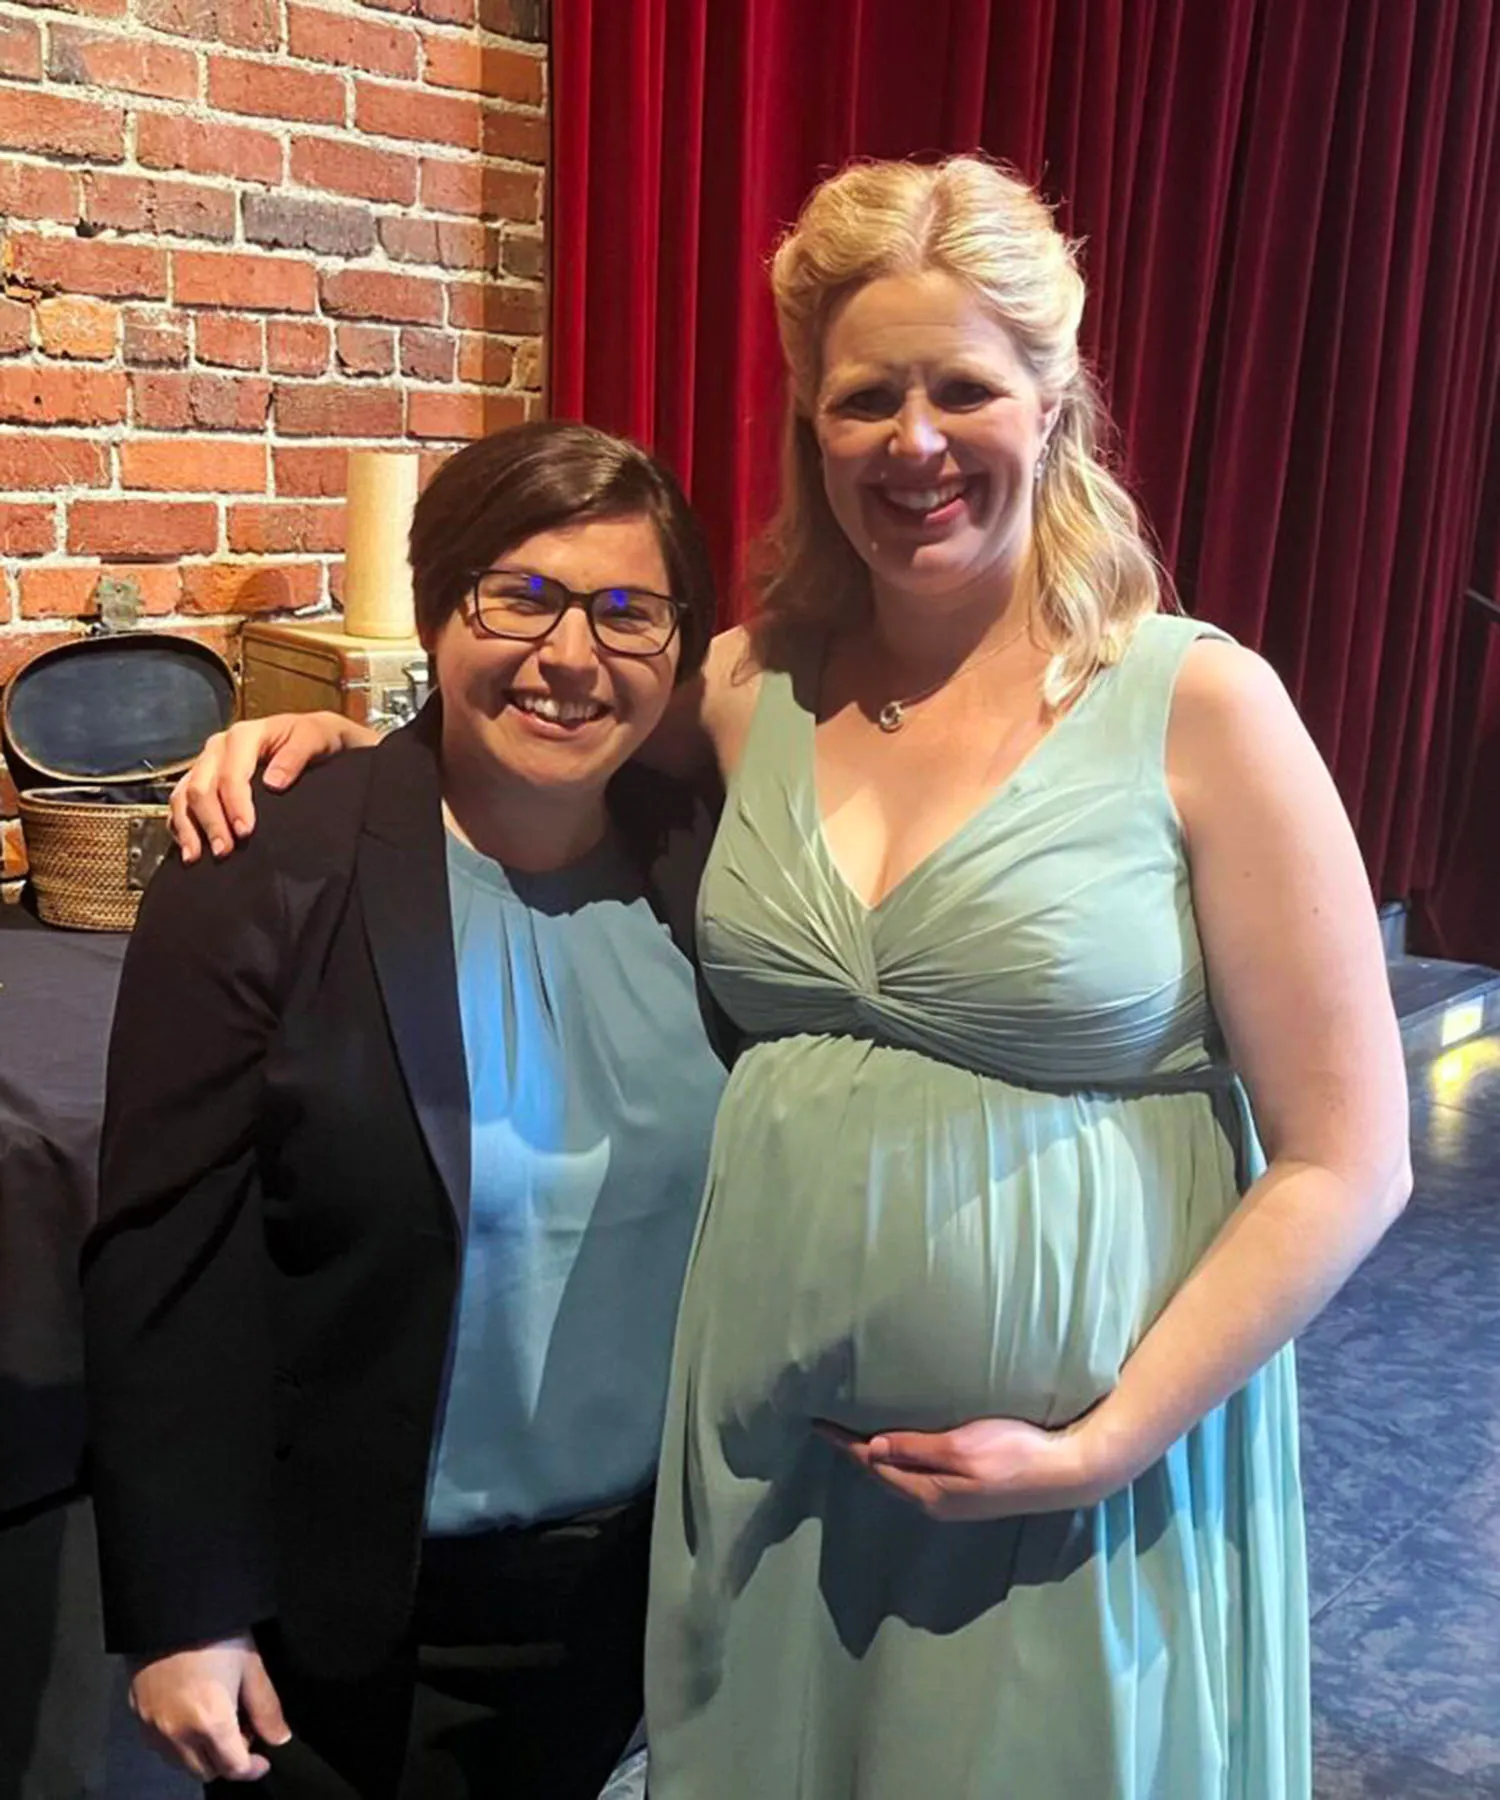 Rebecca Bauer, left, and her wife, Elizabeth Bauer, who is due to give birth in April, pose for a photo together